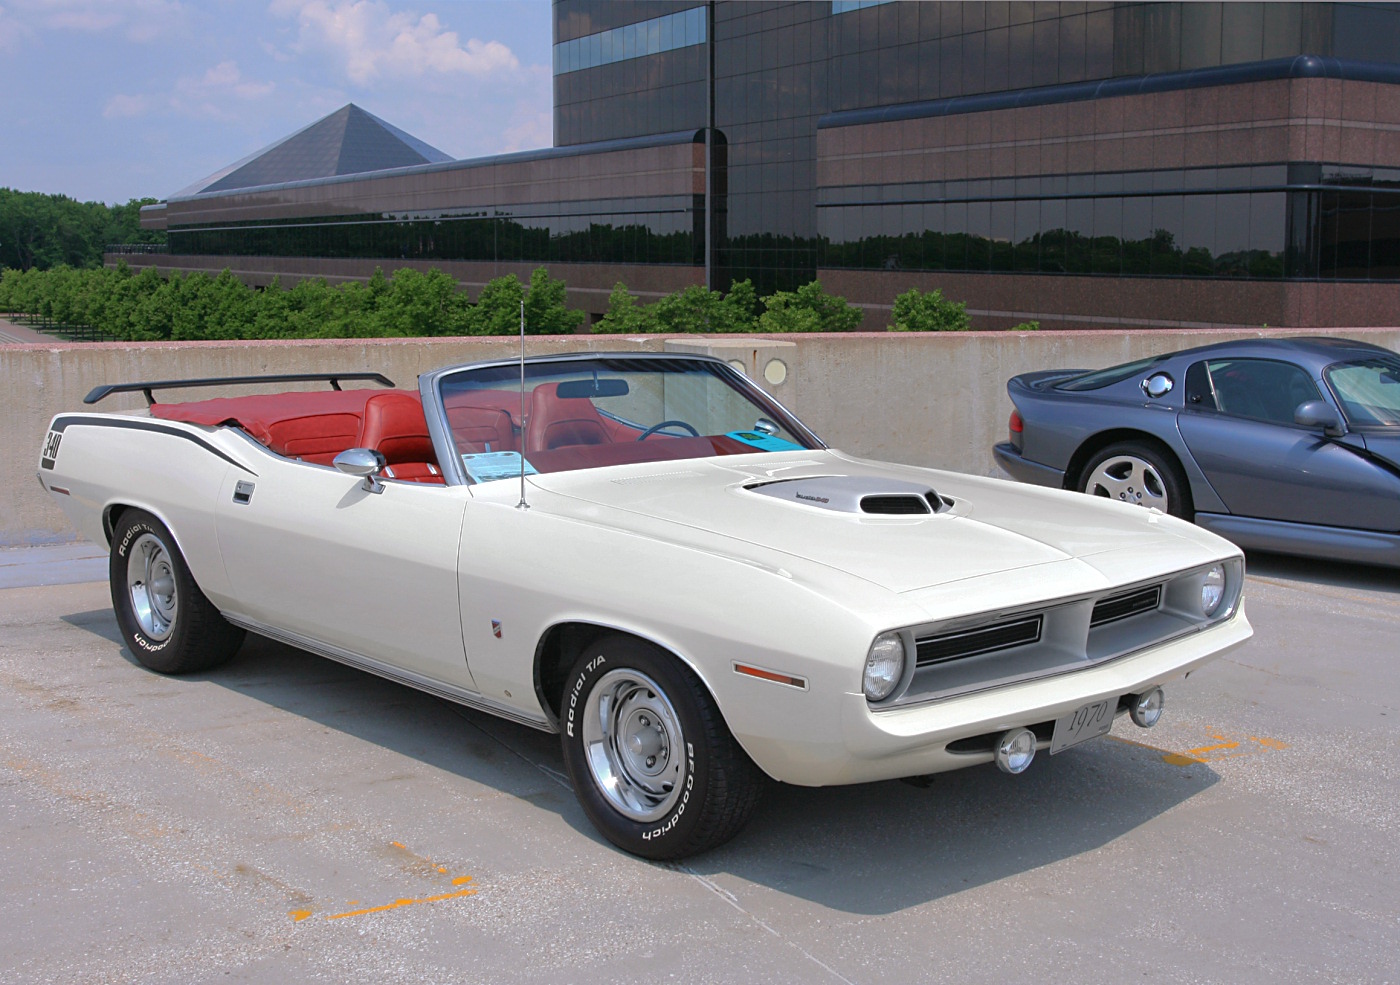 Plymouth Cuda Convertible Classic Car Pictures